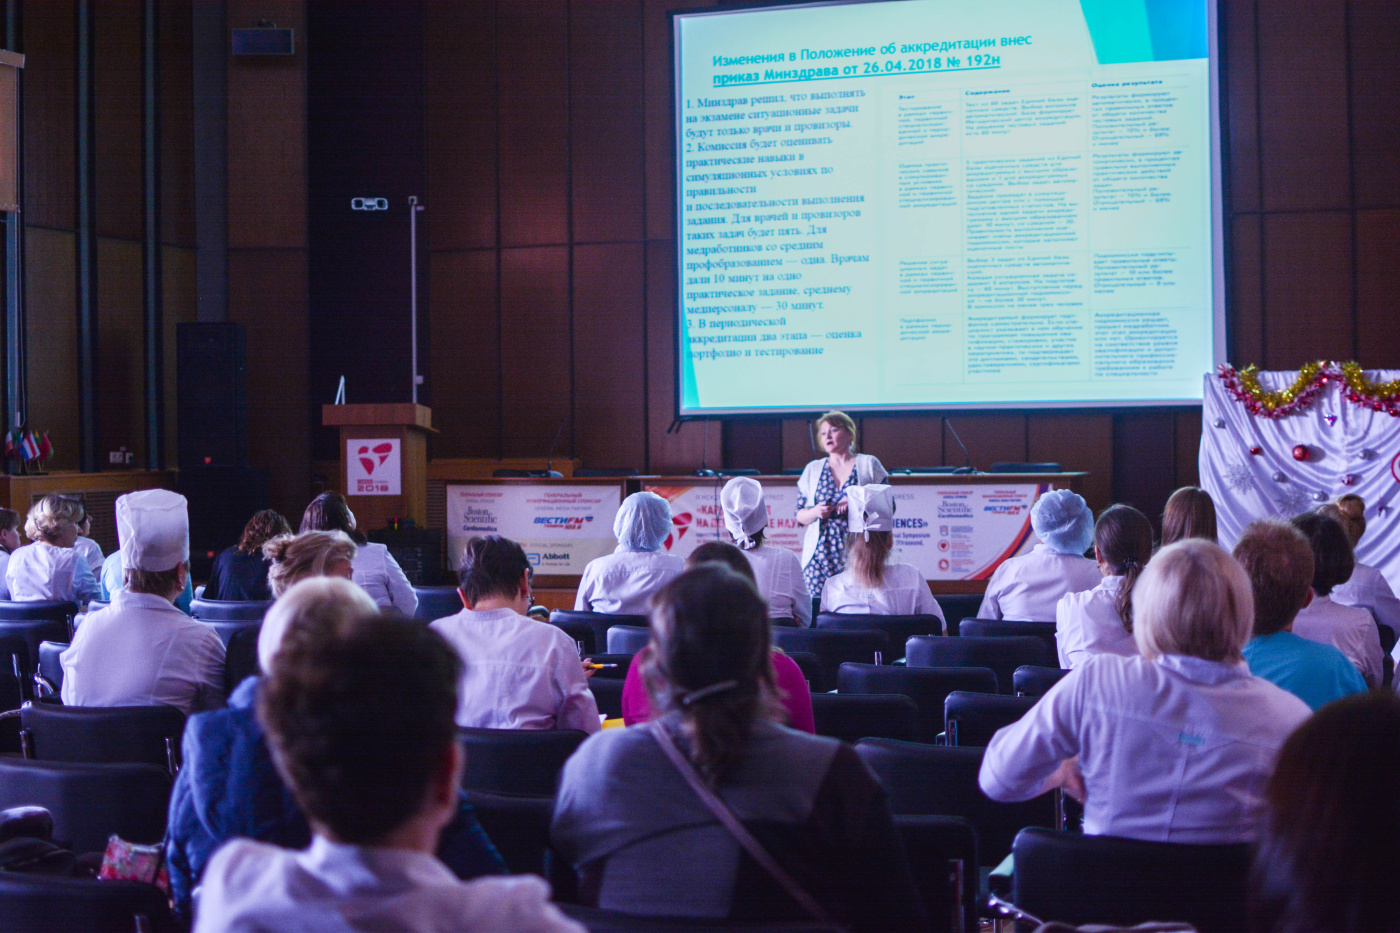 Our Center will hold lectures for physicians from regions